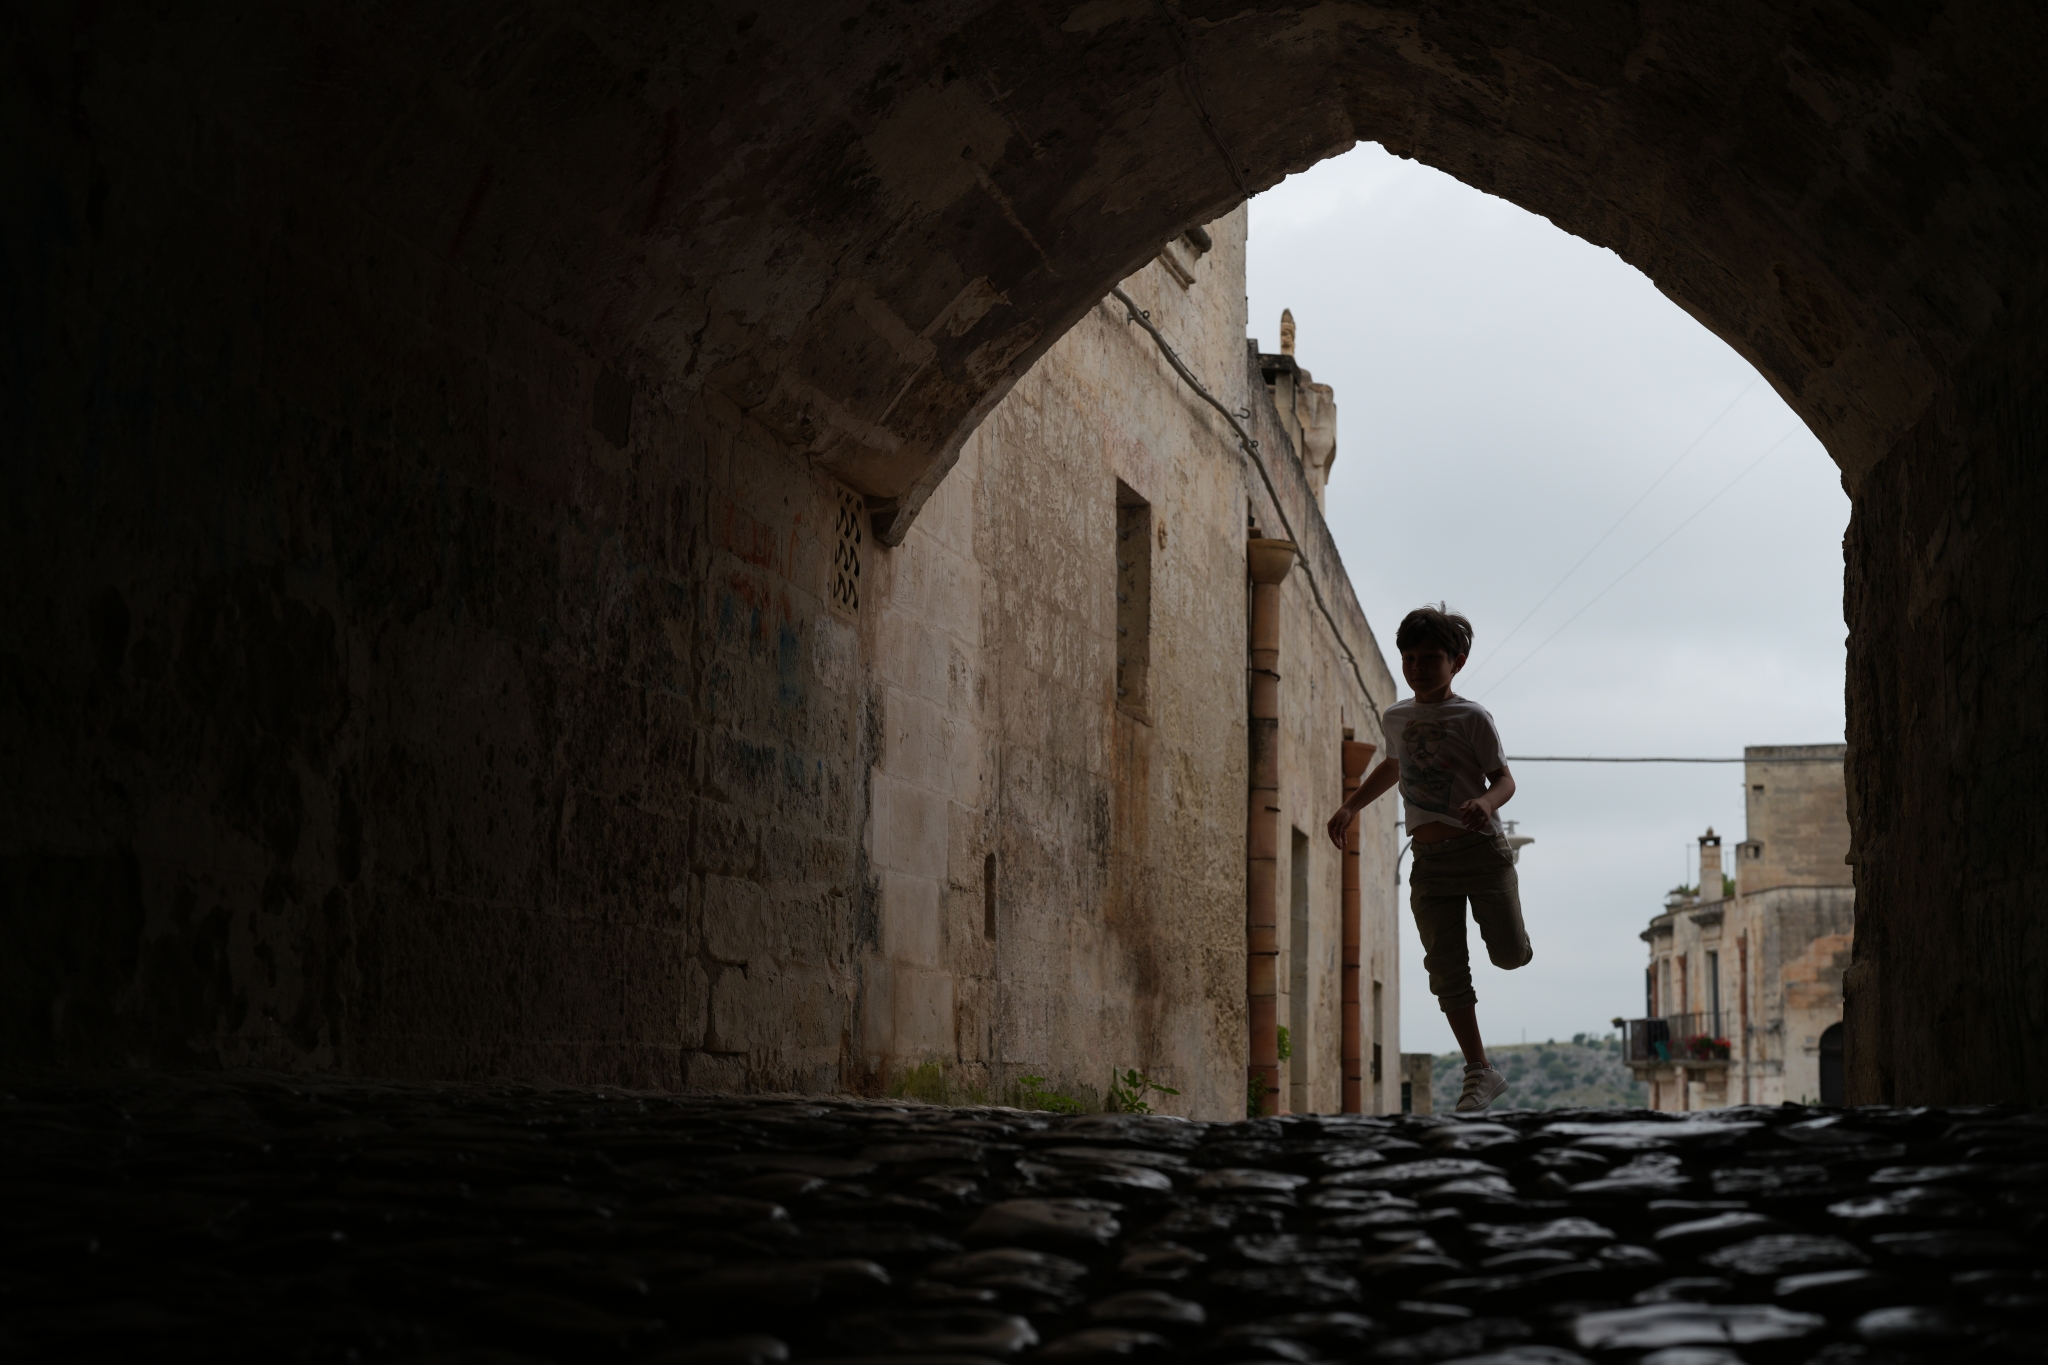 Young boy running through an archway, silhouetted against the sky